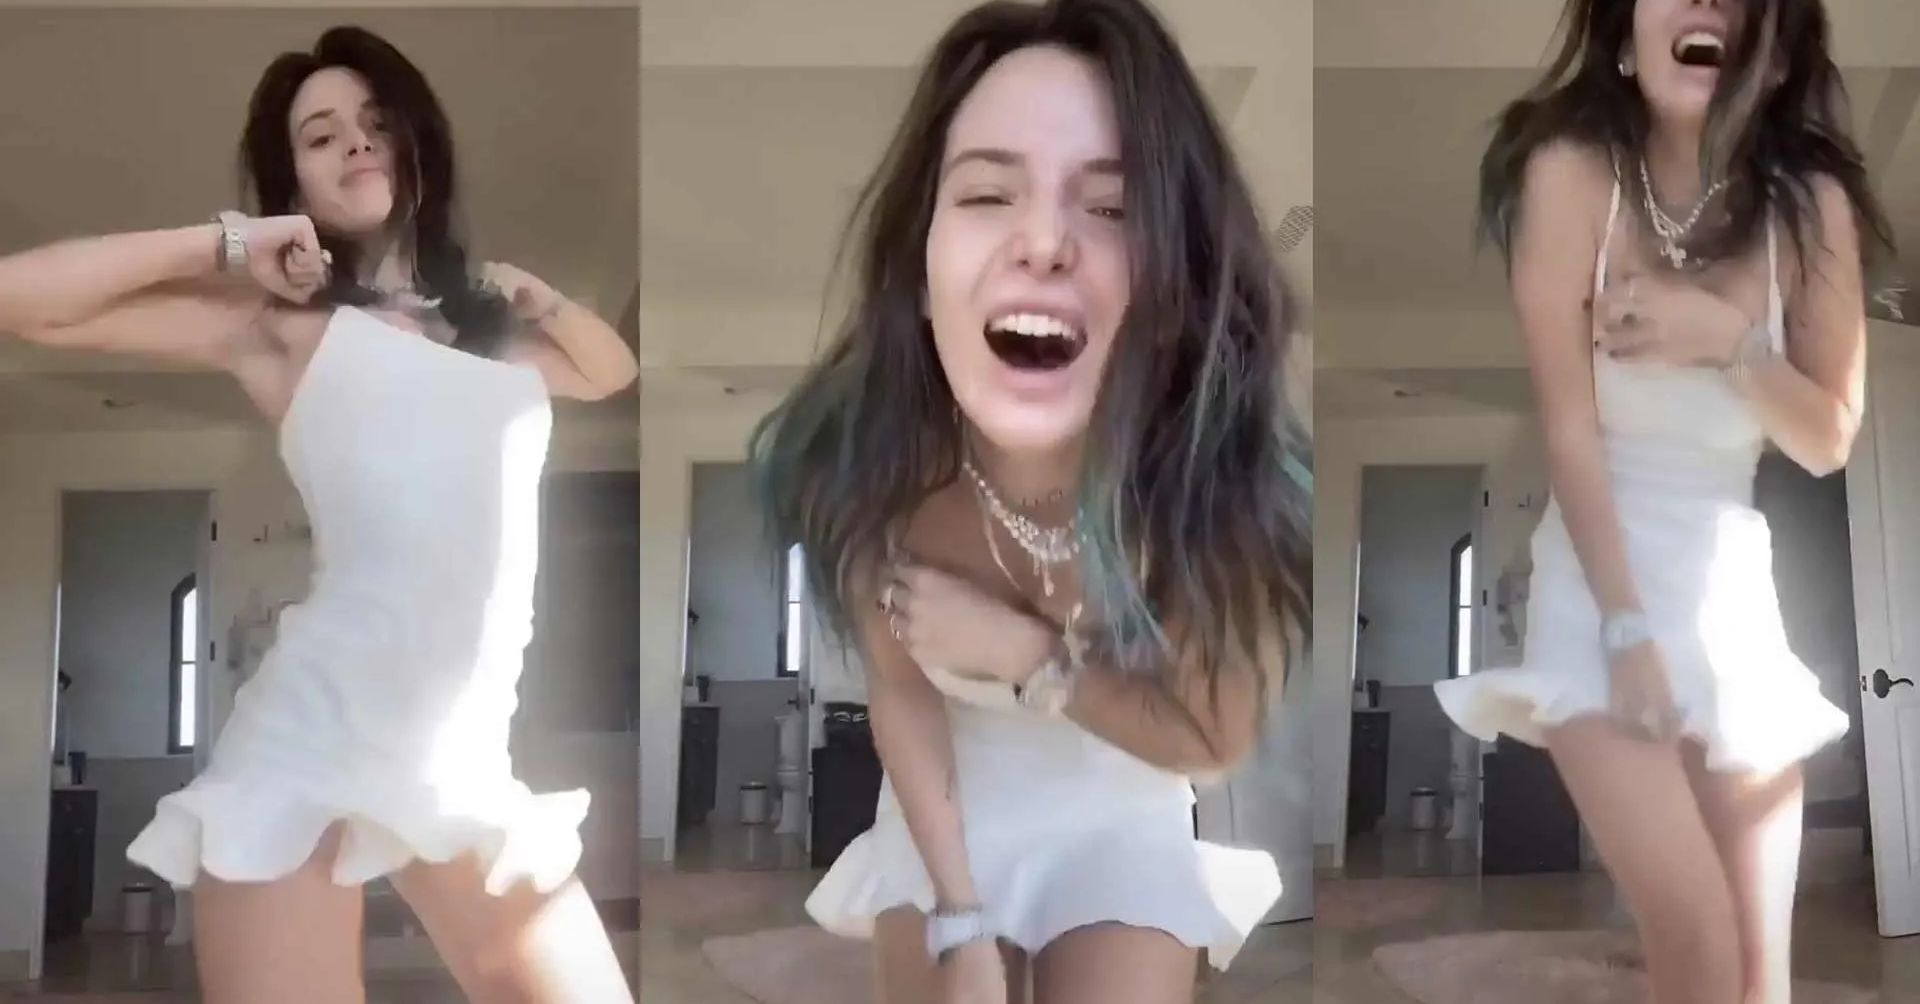 Barely legal tiktok girls going wild and naked